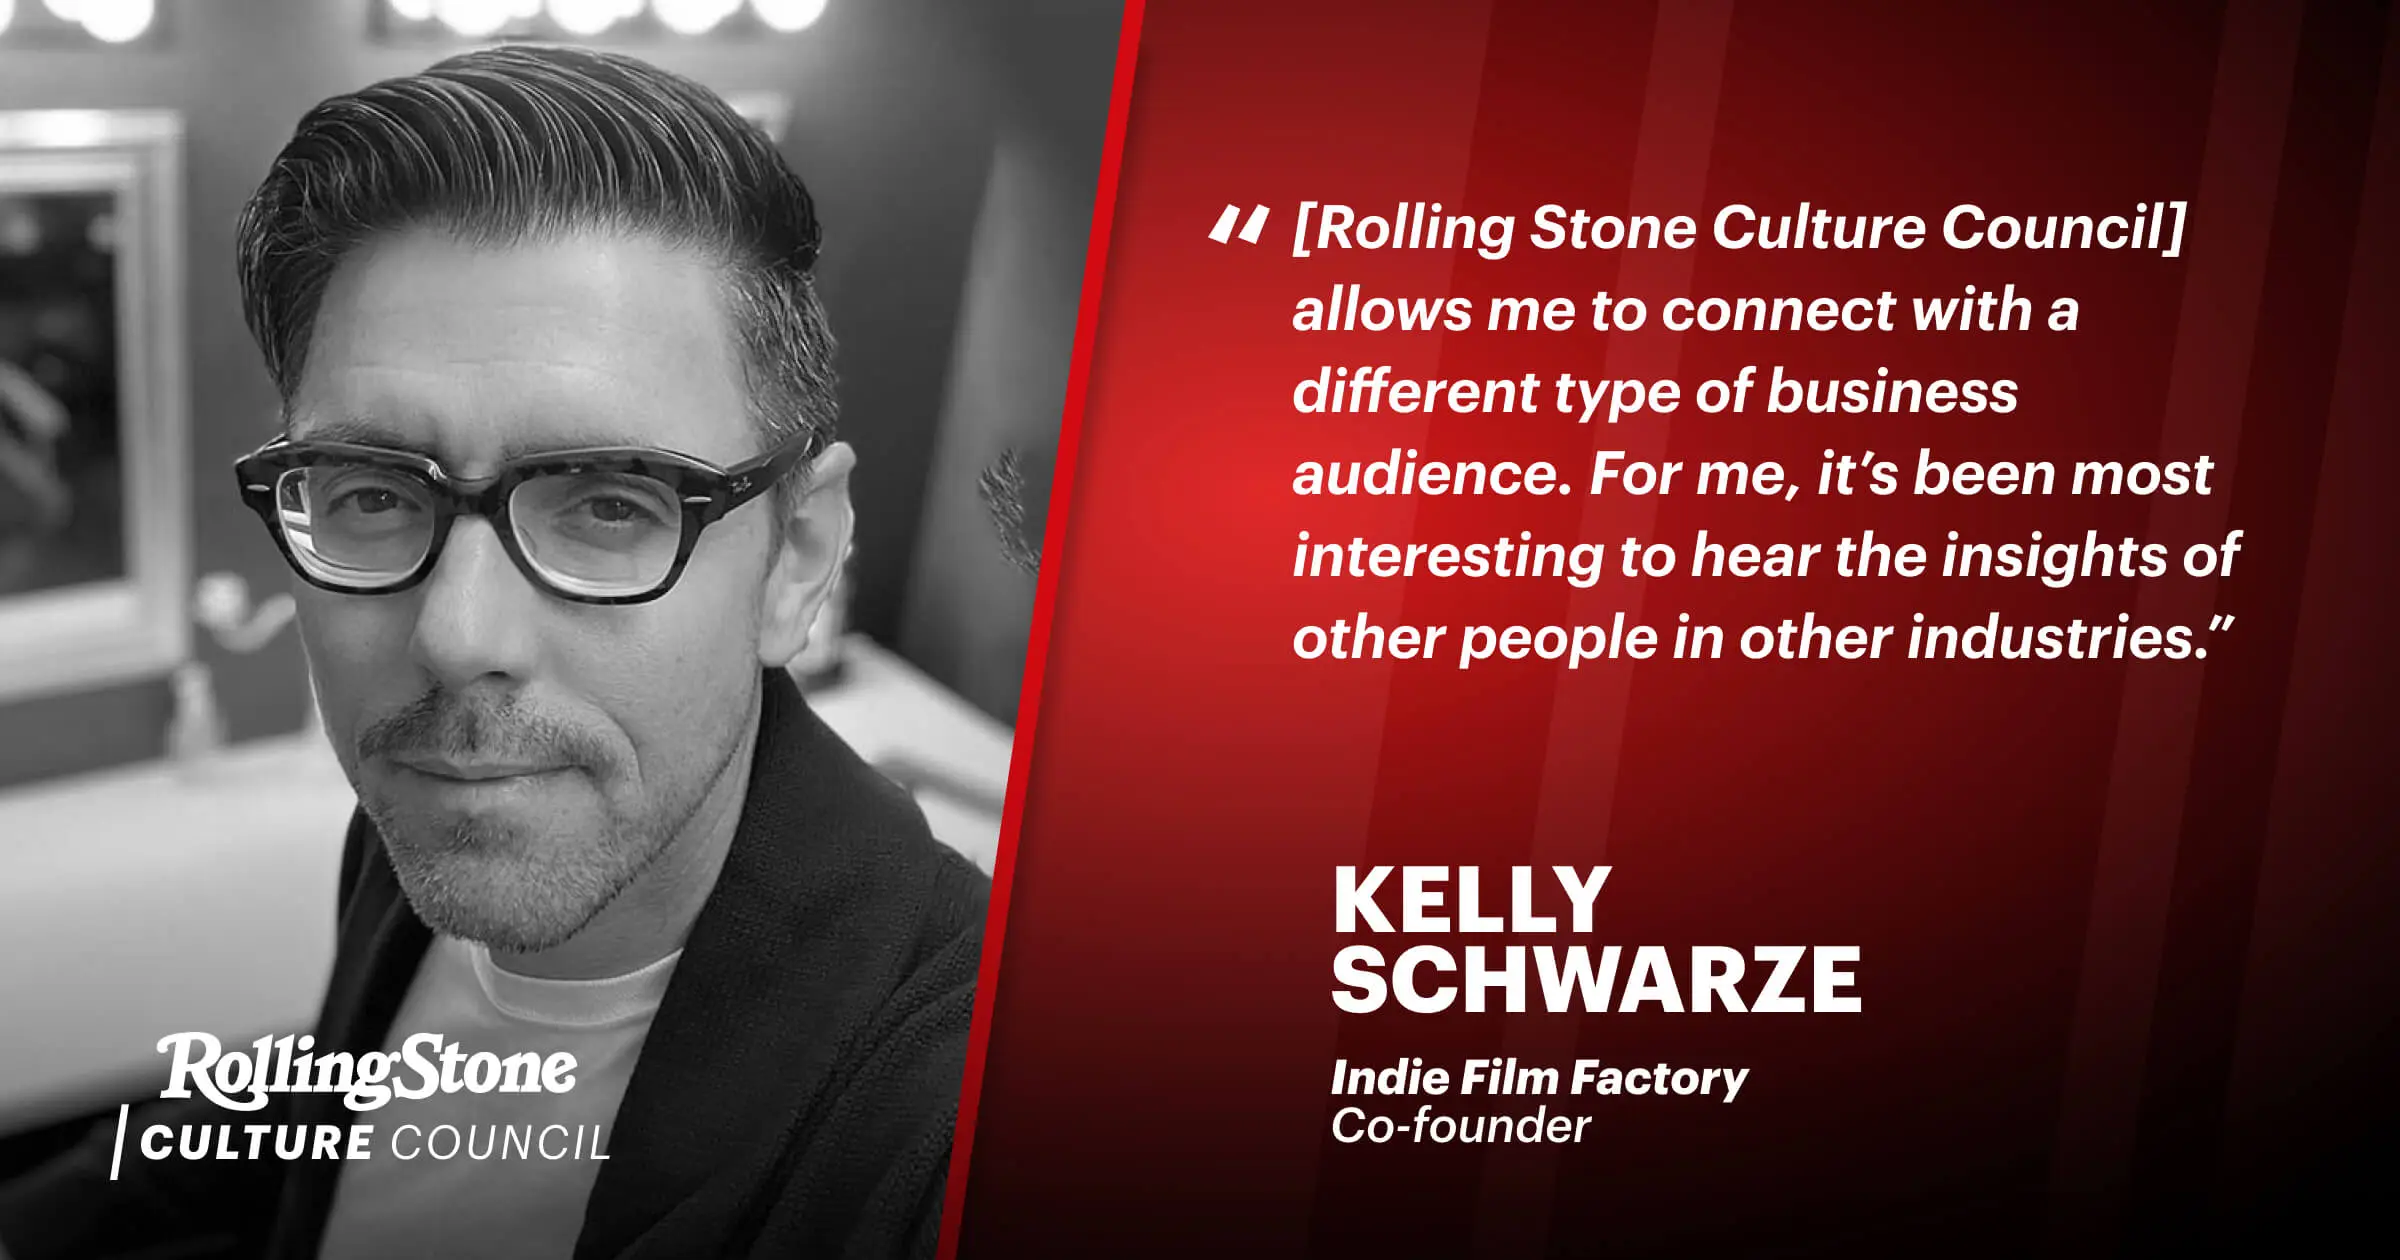 Rolling Stone Culture Council Expands Connections and Perspectives for Kelly Schwarze